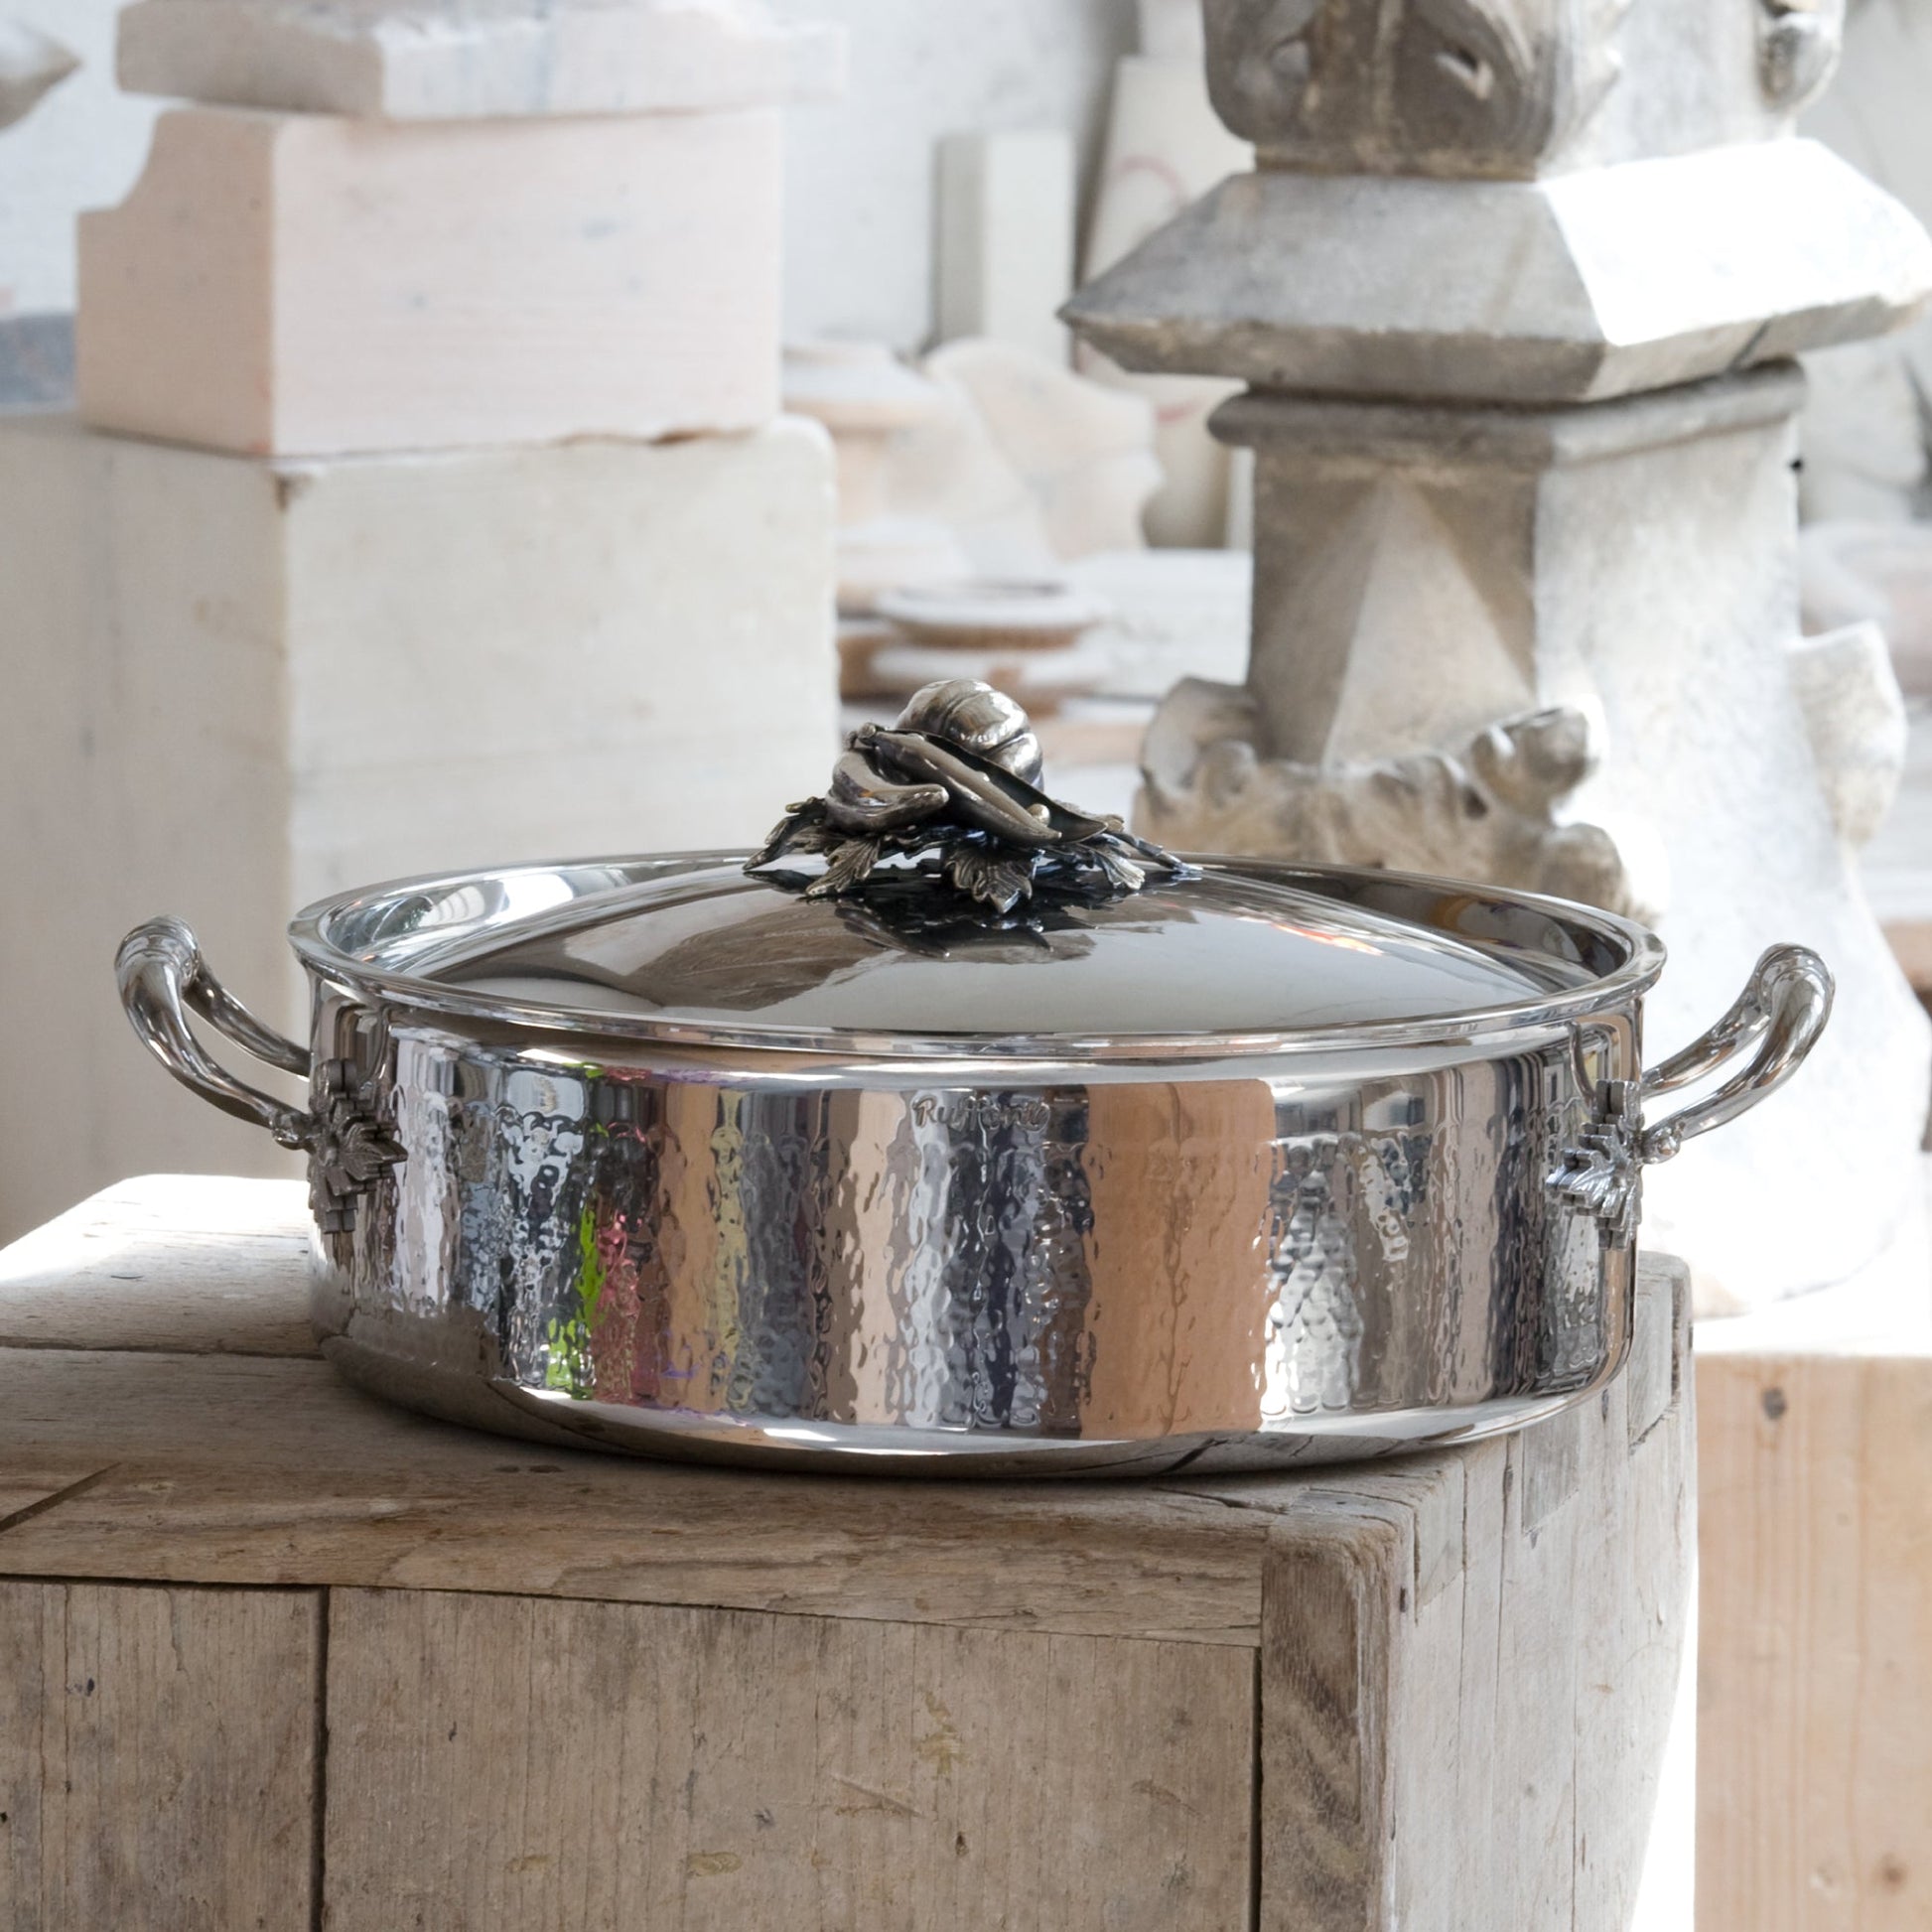 Opus Prima hammered clad stainless steel braiser with decorated silver-plated lid knob finial from Ruffoni